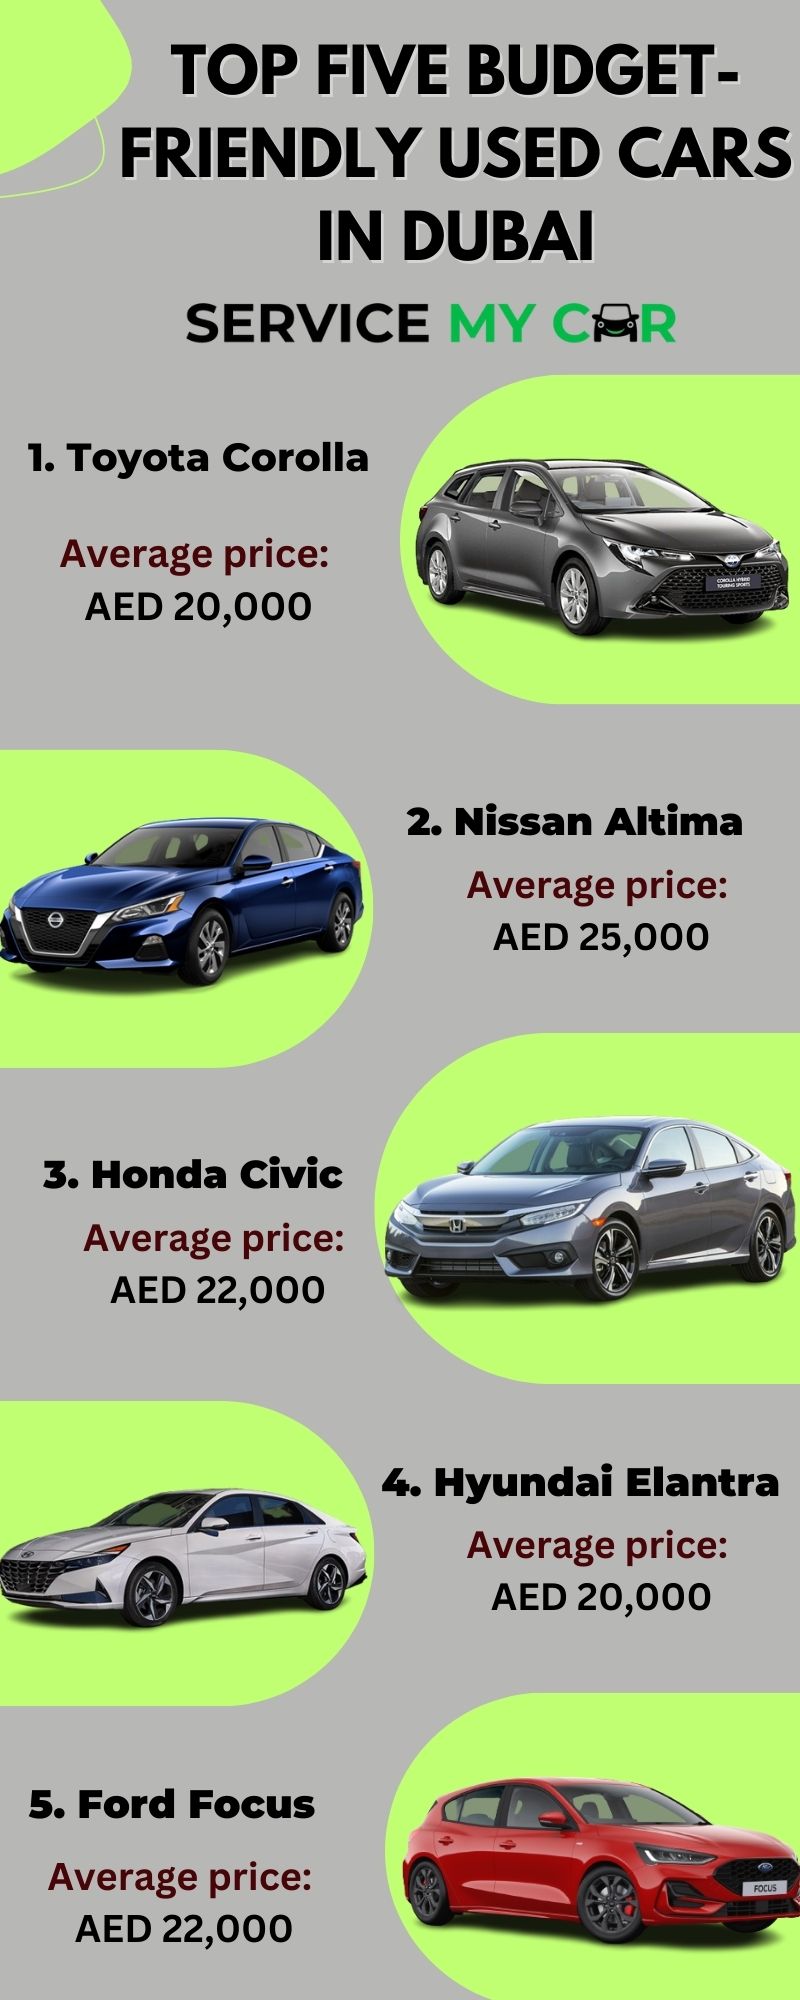 The Top Five Budget-Friendly Used Cars in Dubai